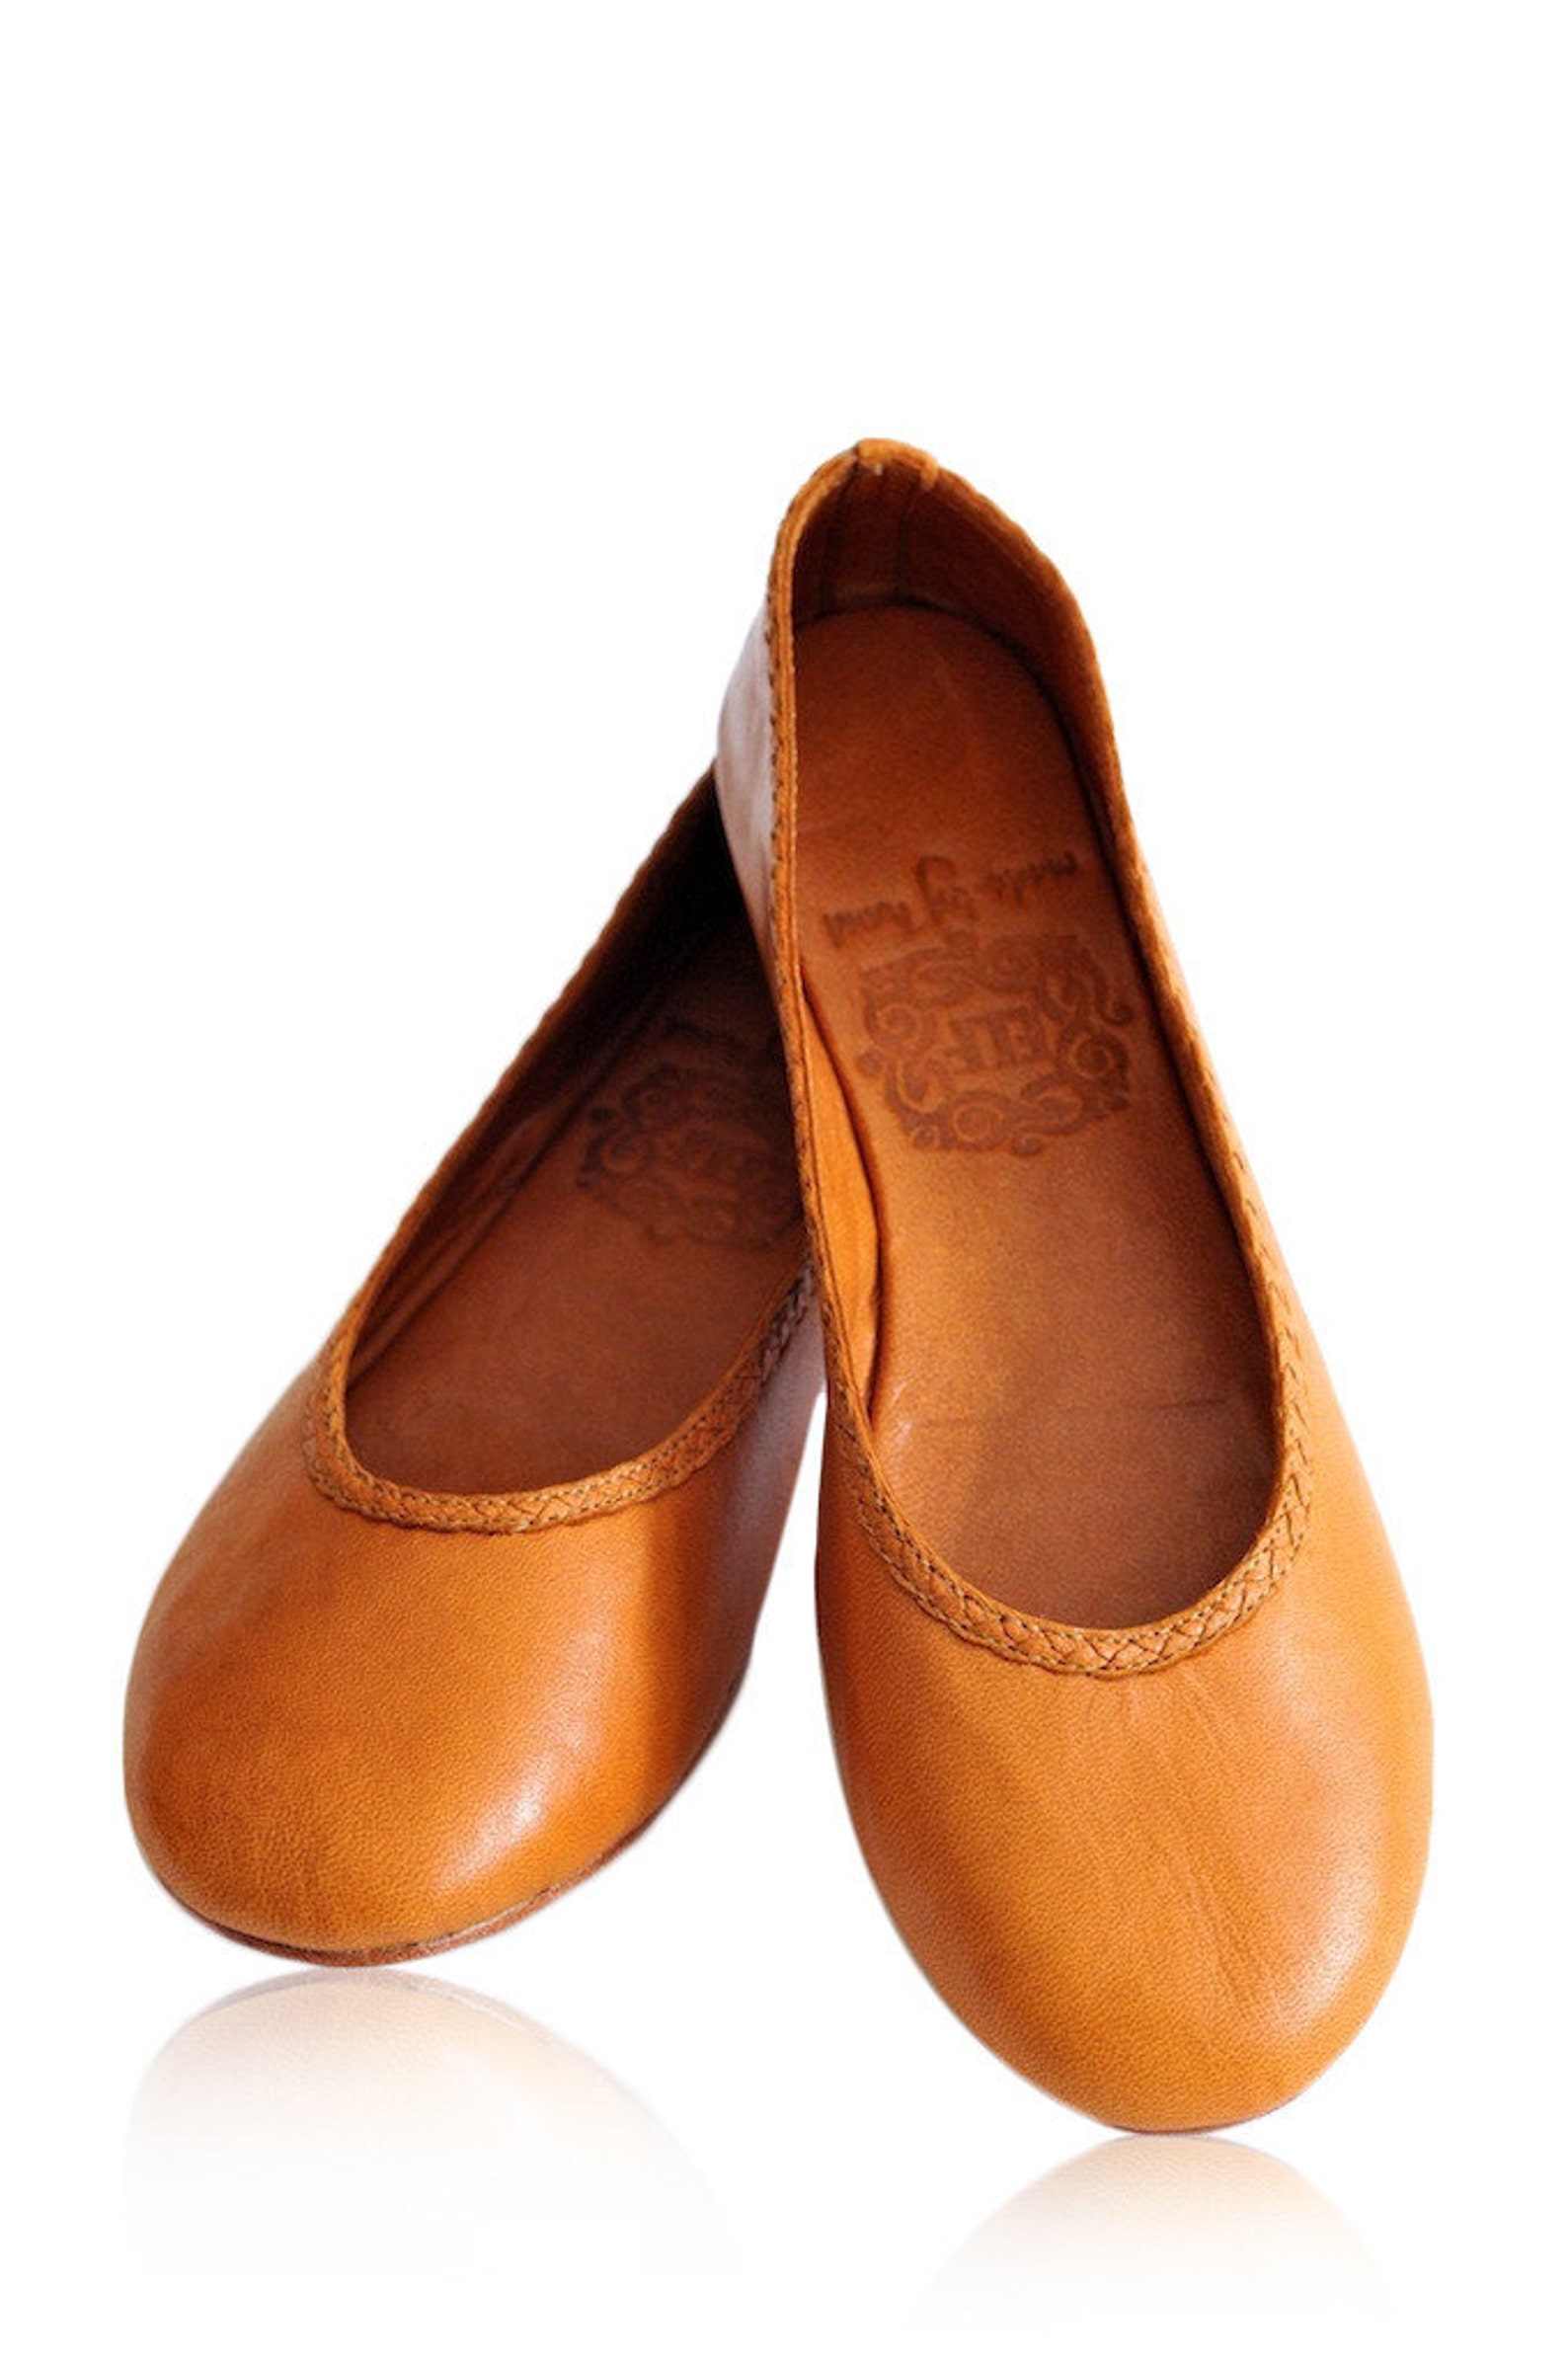 aisÉ. ballet flats / leather shoes / womens shoes / custom shoes / tan leather. sizes: us 4-13. available in different leather c